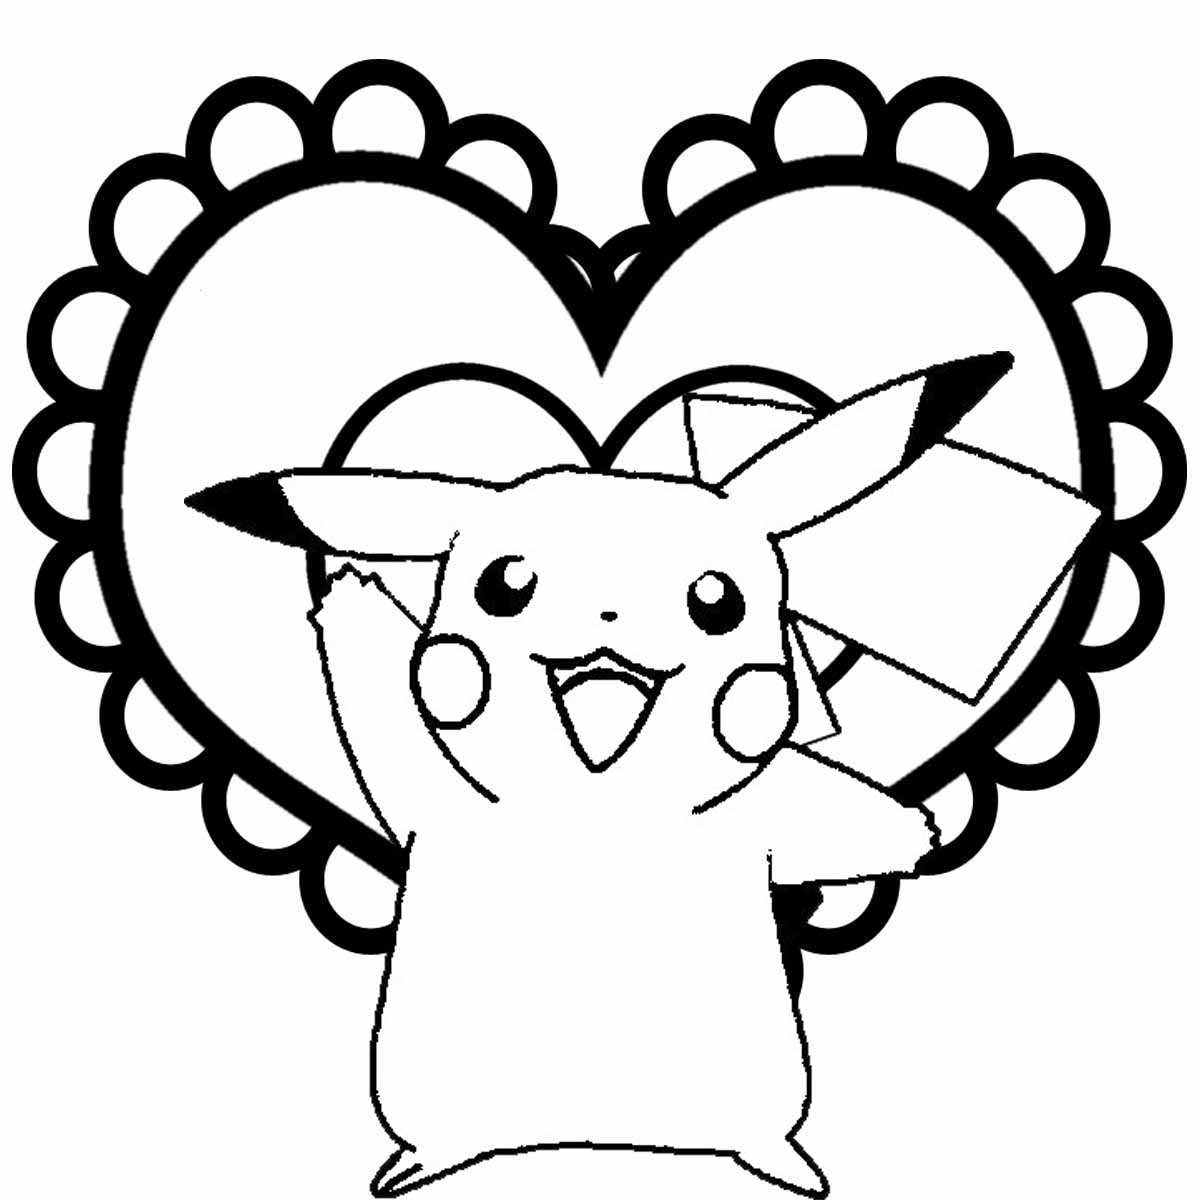 Pokemon coloring page to print and color